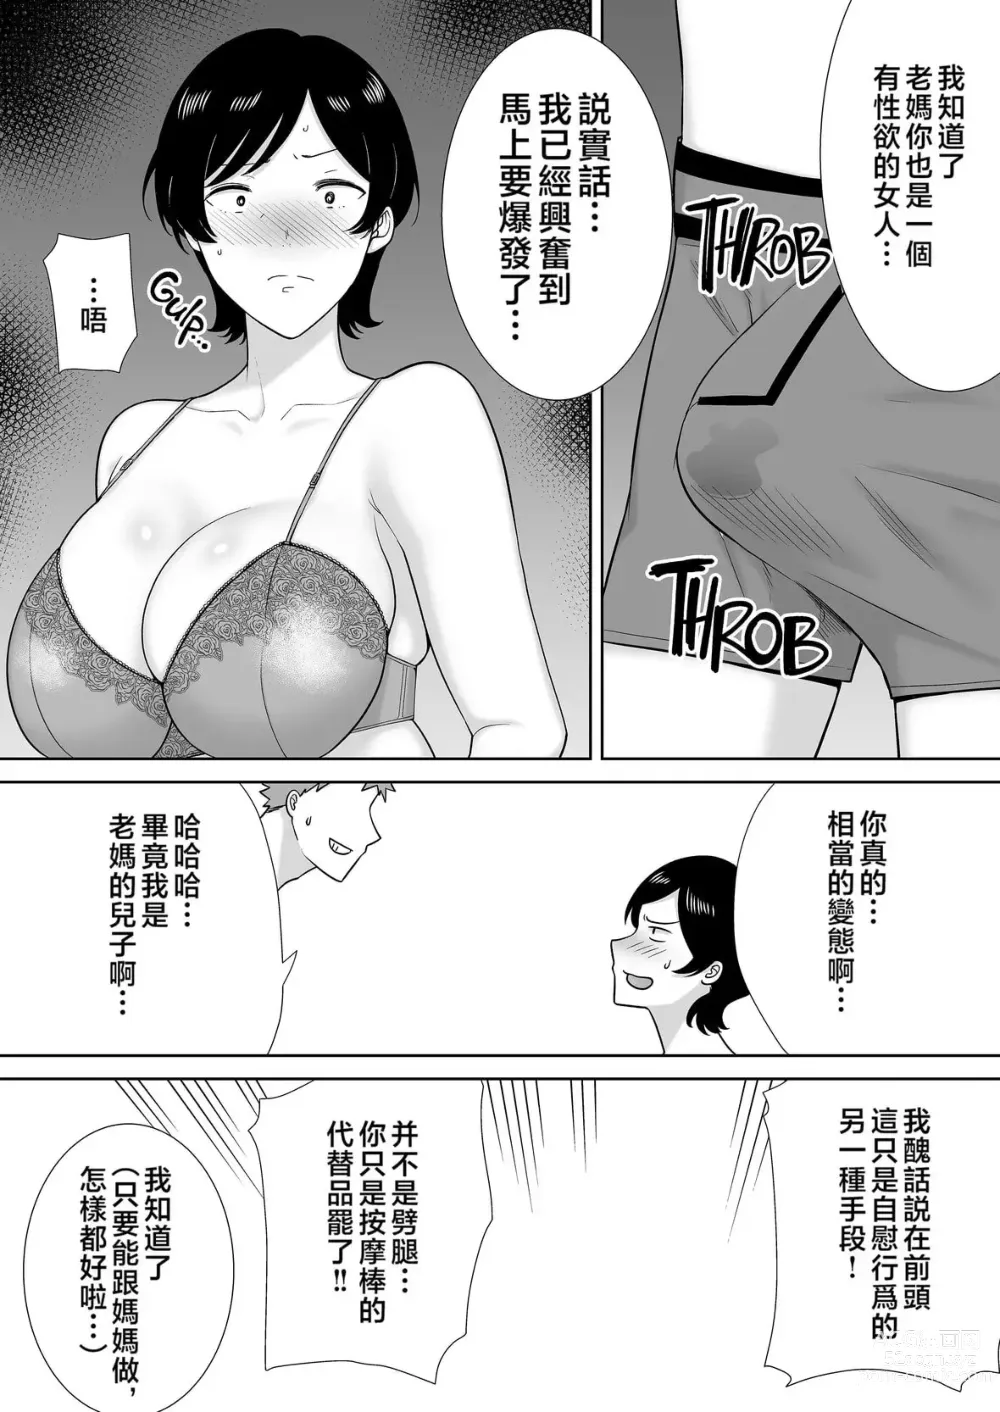 Page 20 of doujinshi even mom want a litle lovin